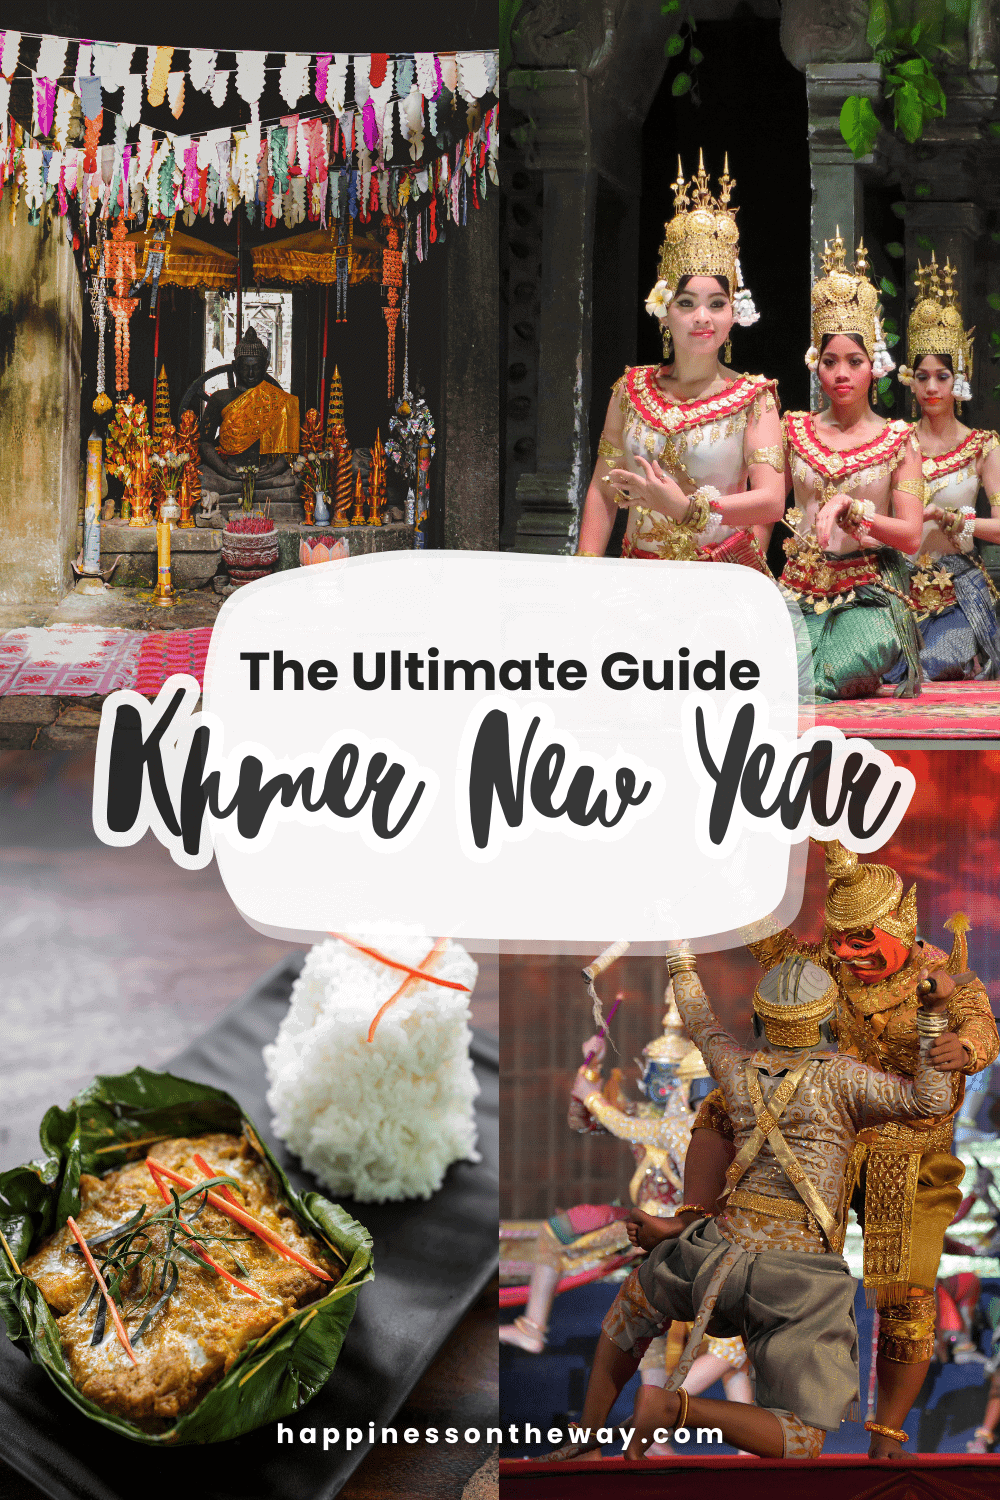 The Ultimate Guide to Khmer New Year